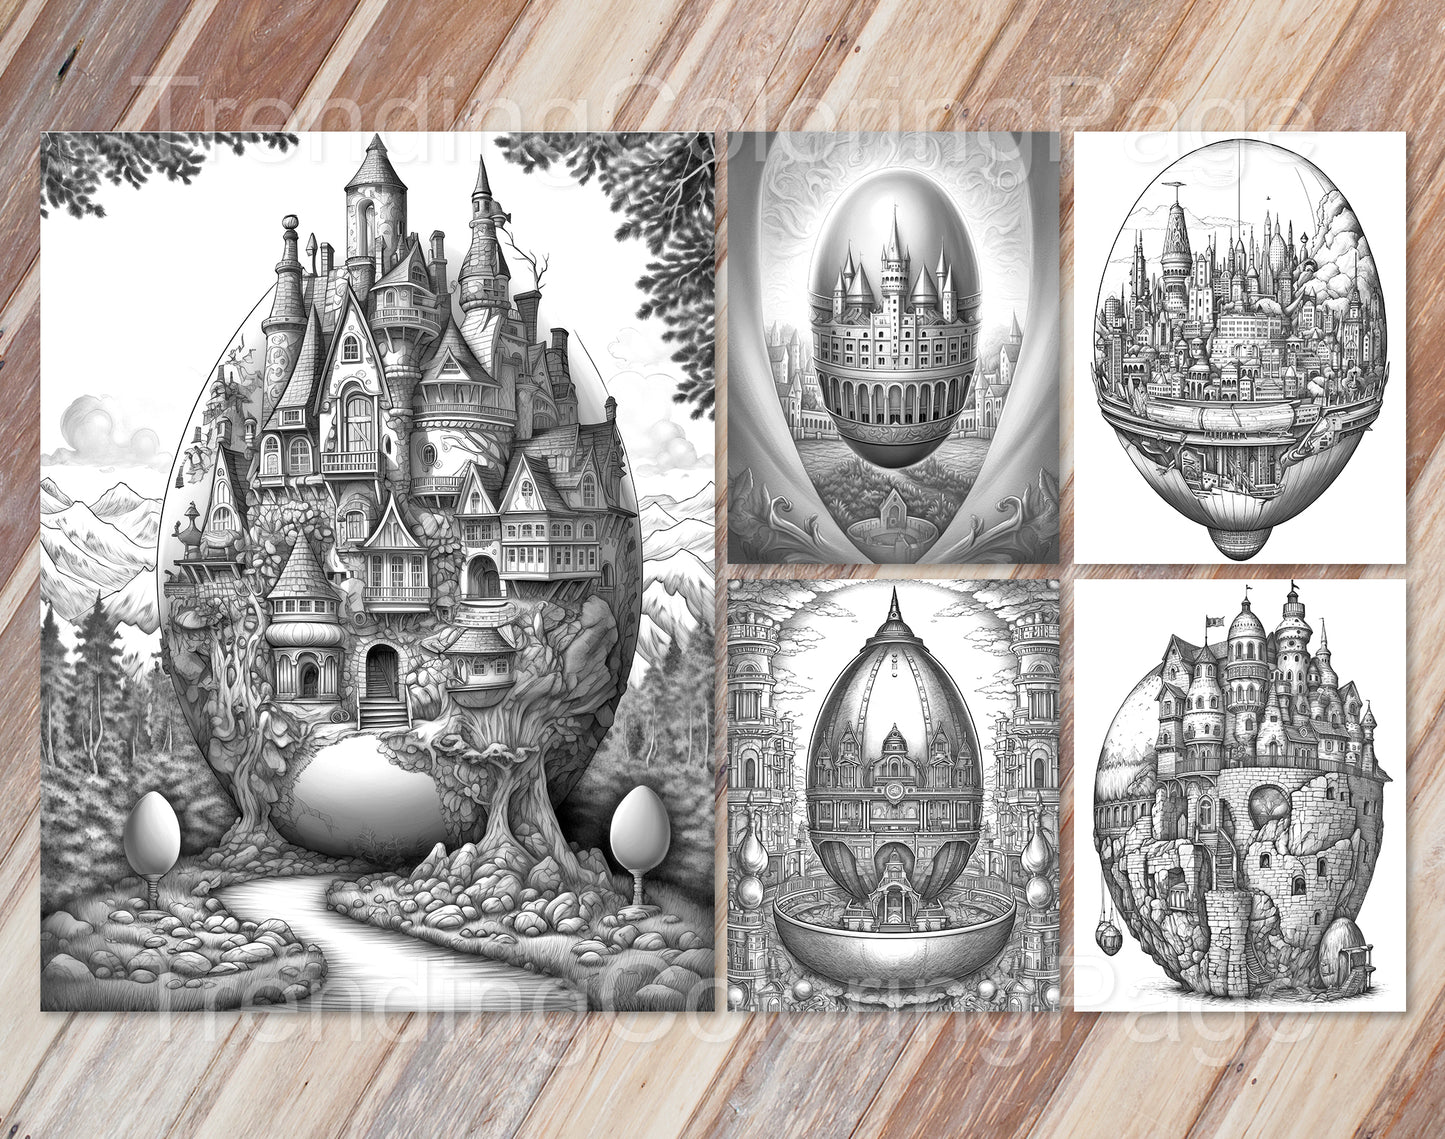 35 Easter Egg Dreamland Grayscale Coloring Pages - Instant Download - Printable Dark/Light